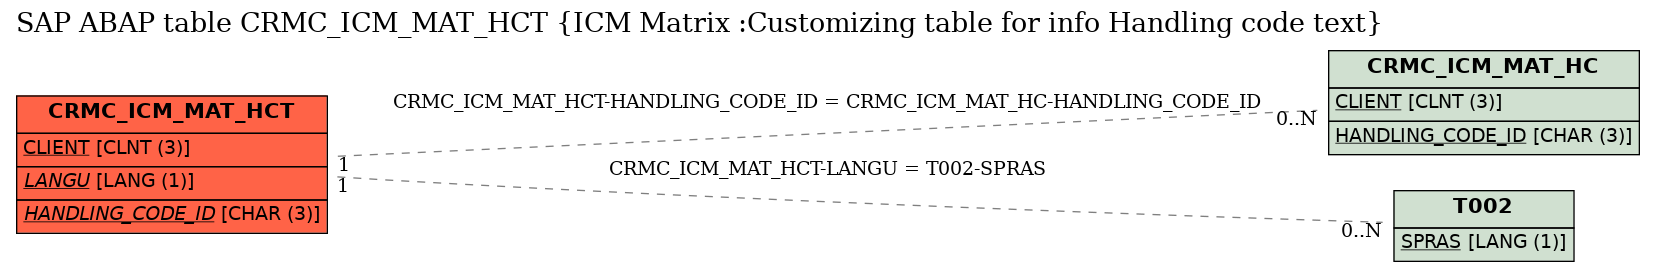 E-R Diagram for table CRMC_ICM_MAT_HCT (ICM Matrix :Customizing table for info Handling code text)